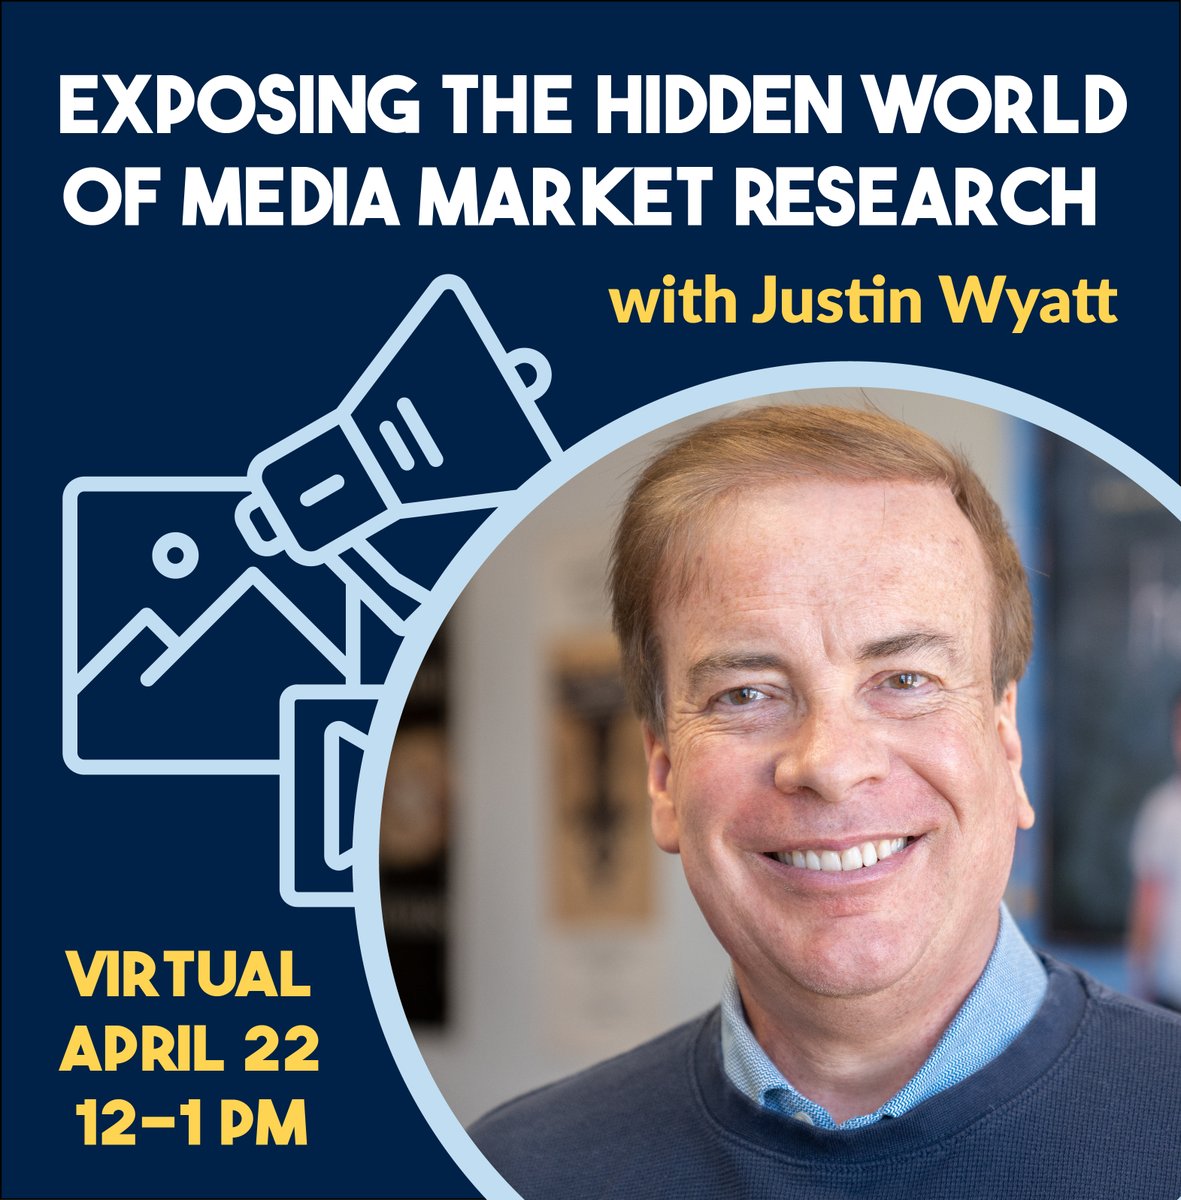 Register today for “Exposing the Hidden World of Media Market Research,” an online conversation with Justin Wyatt held by the @MedEduLab. On April 22nd, Professor Wyatt will examine the world of professional media market research to unveil viewer insights. mediaeducationlab.com/events/exposin…